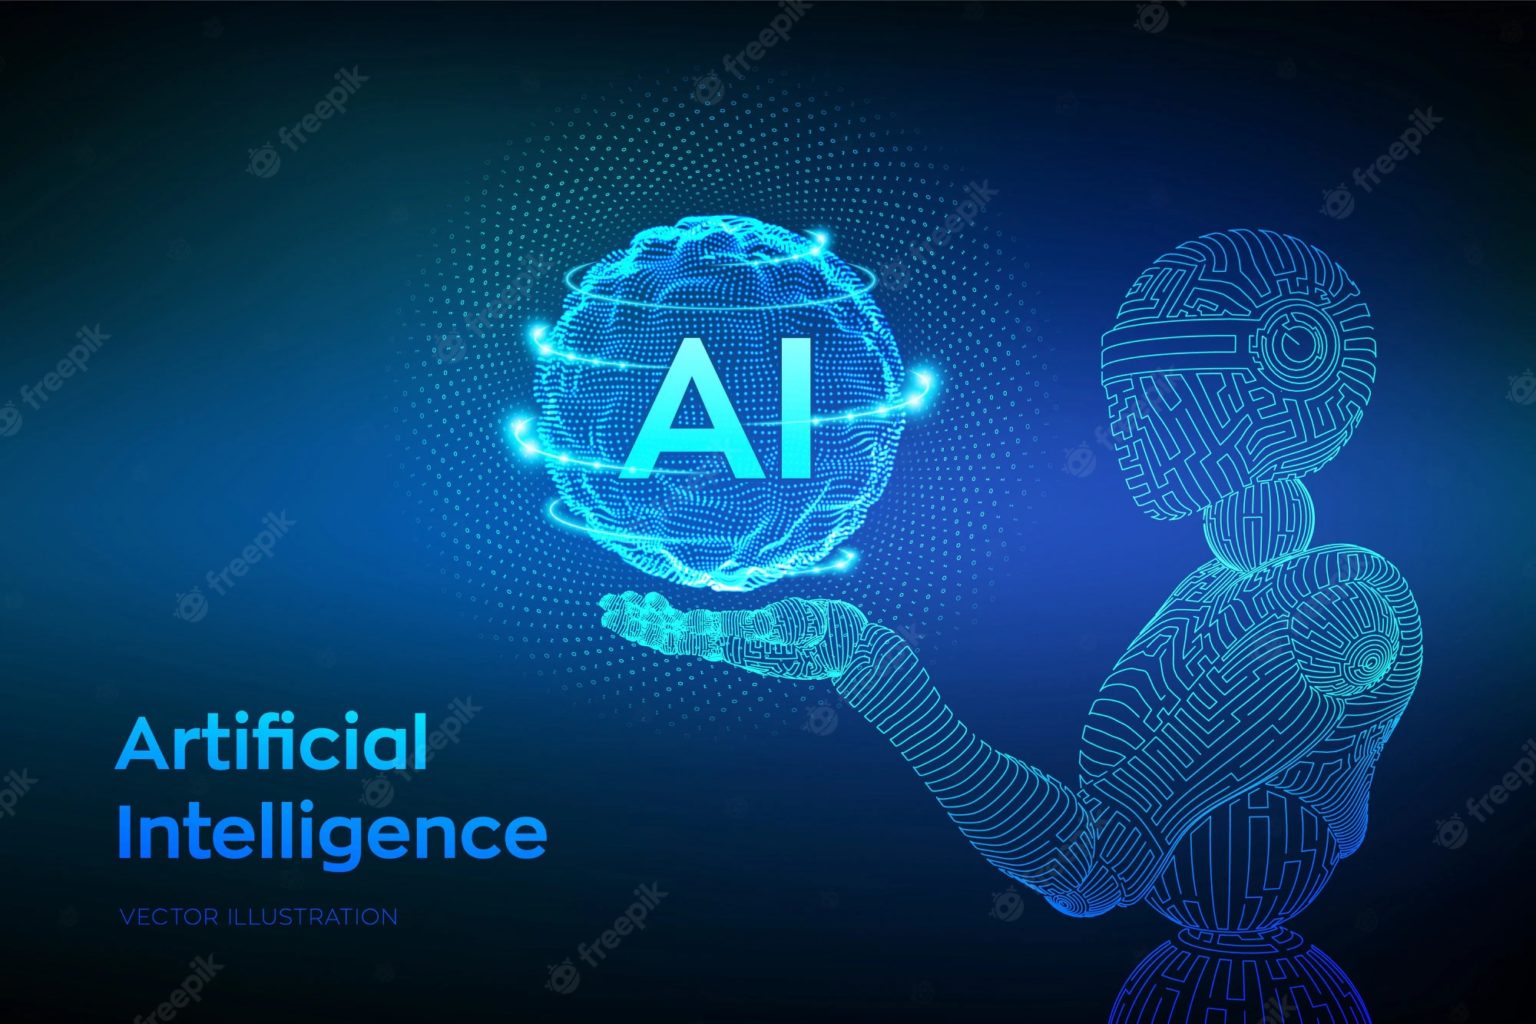 What is the ability of AI to write articles like